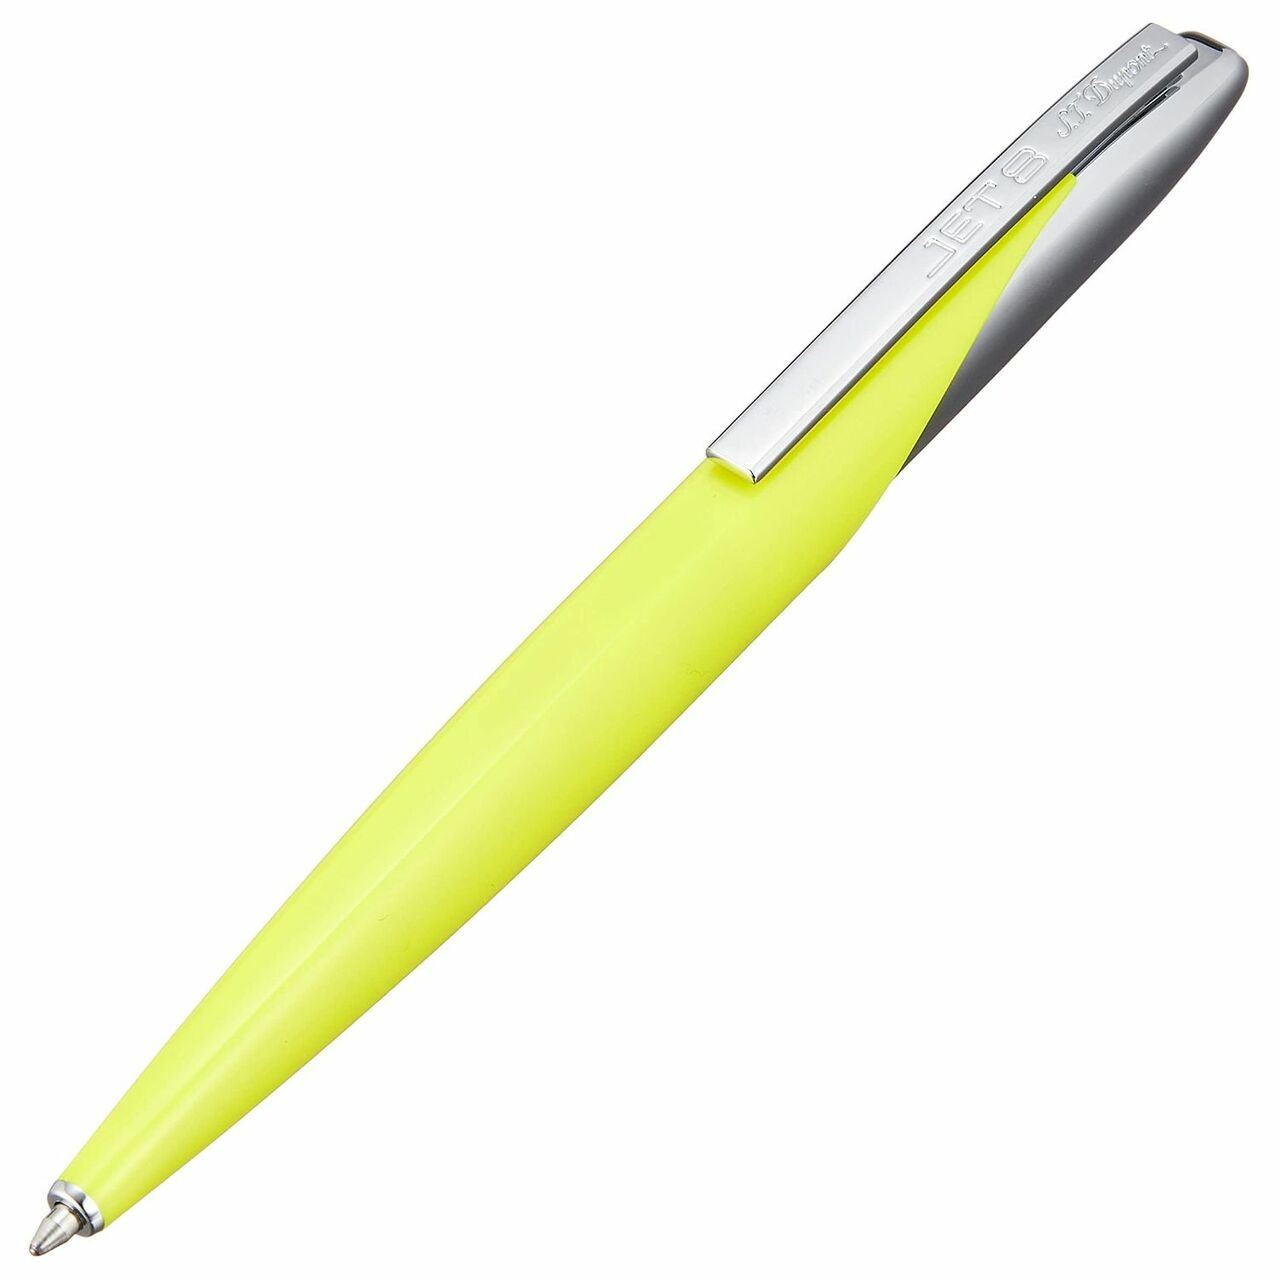 A S.T. Dupont Jet 8 Sunny Resin Yellow w/ Chrome Trim Ballpoint Pen - In Box - 444107 with a metallic structure on a white background.